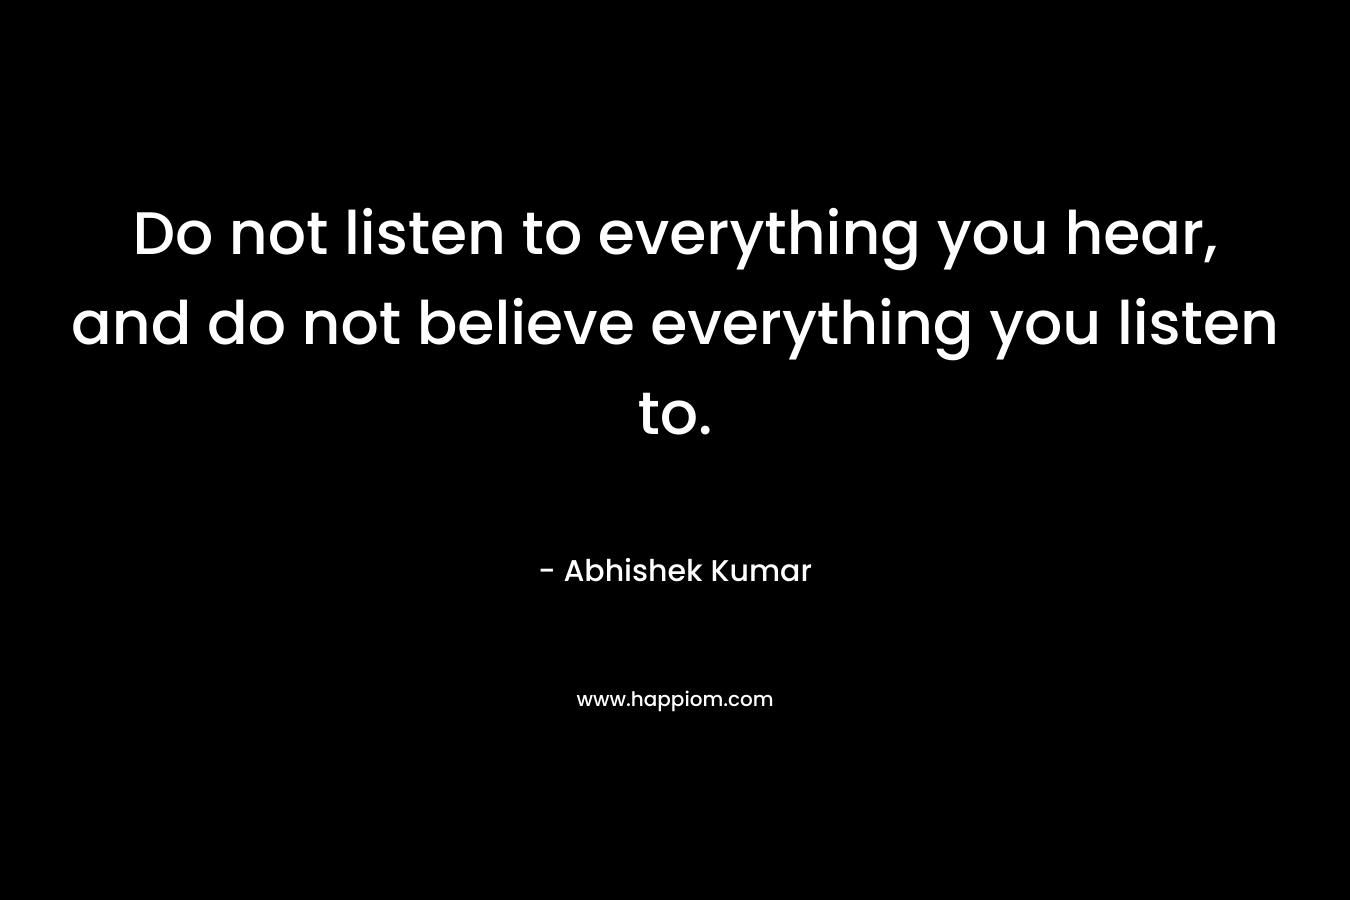 Do not listen to everything you hear, and do not believe everything you listen to.